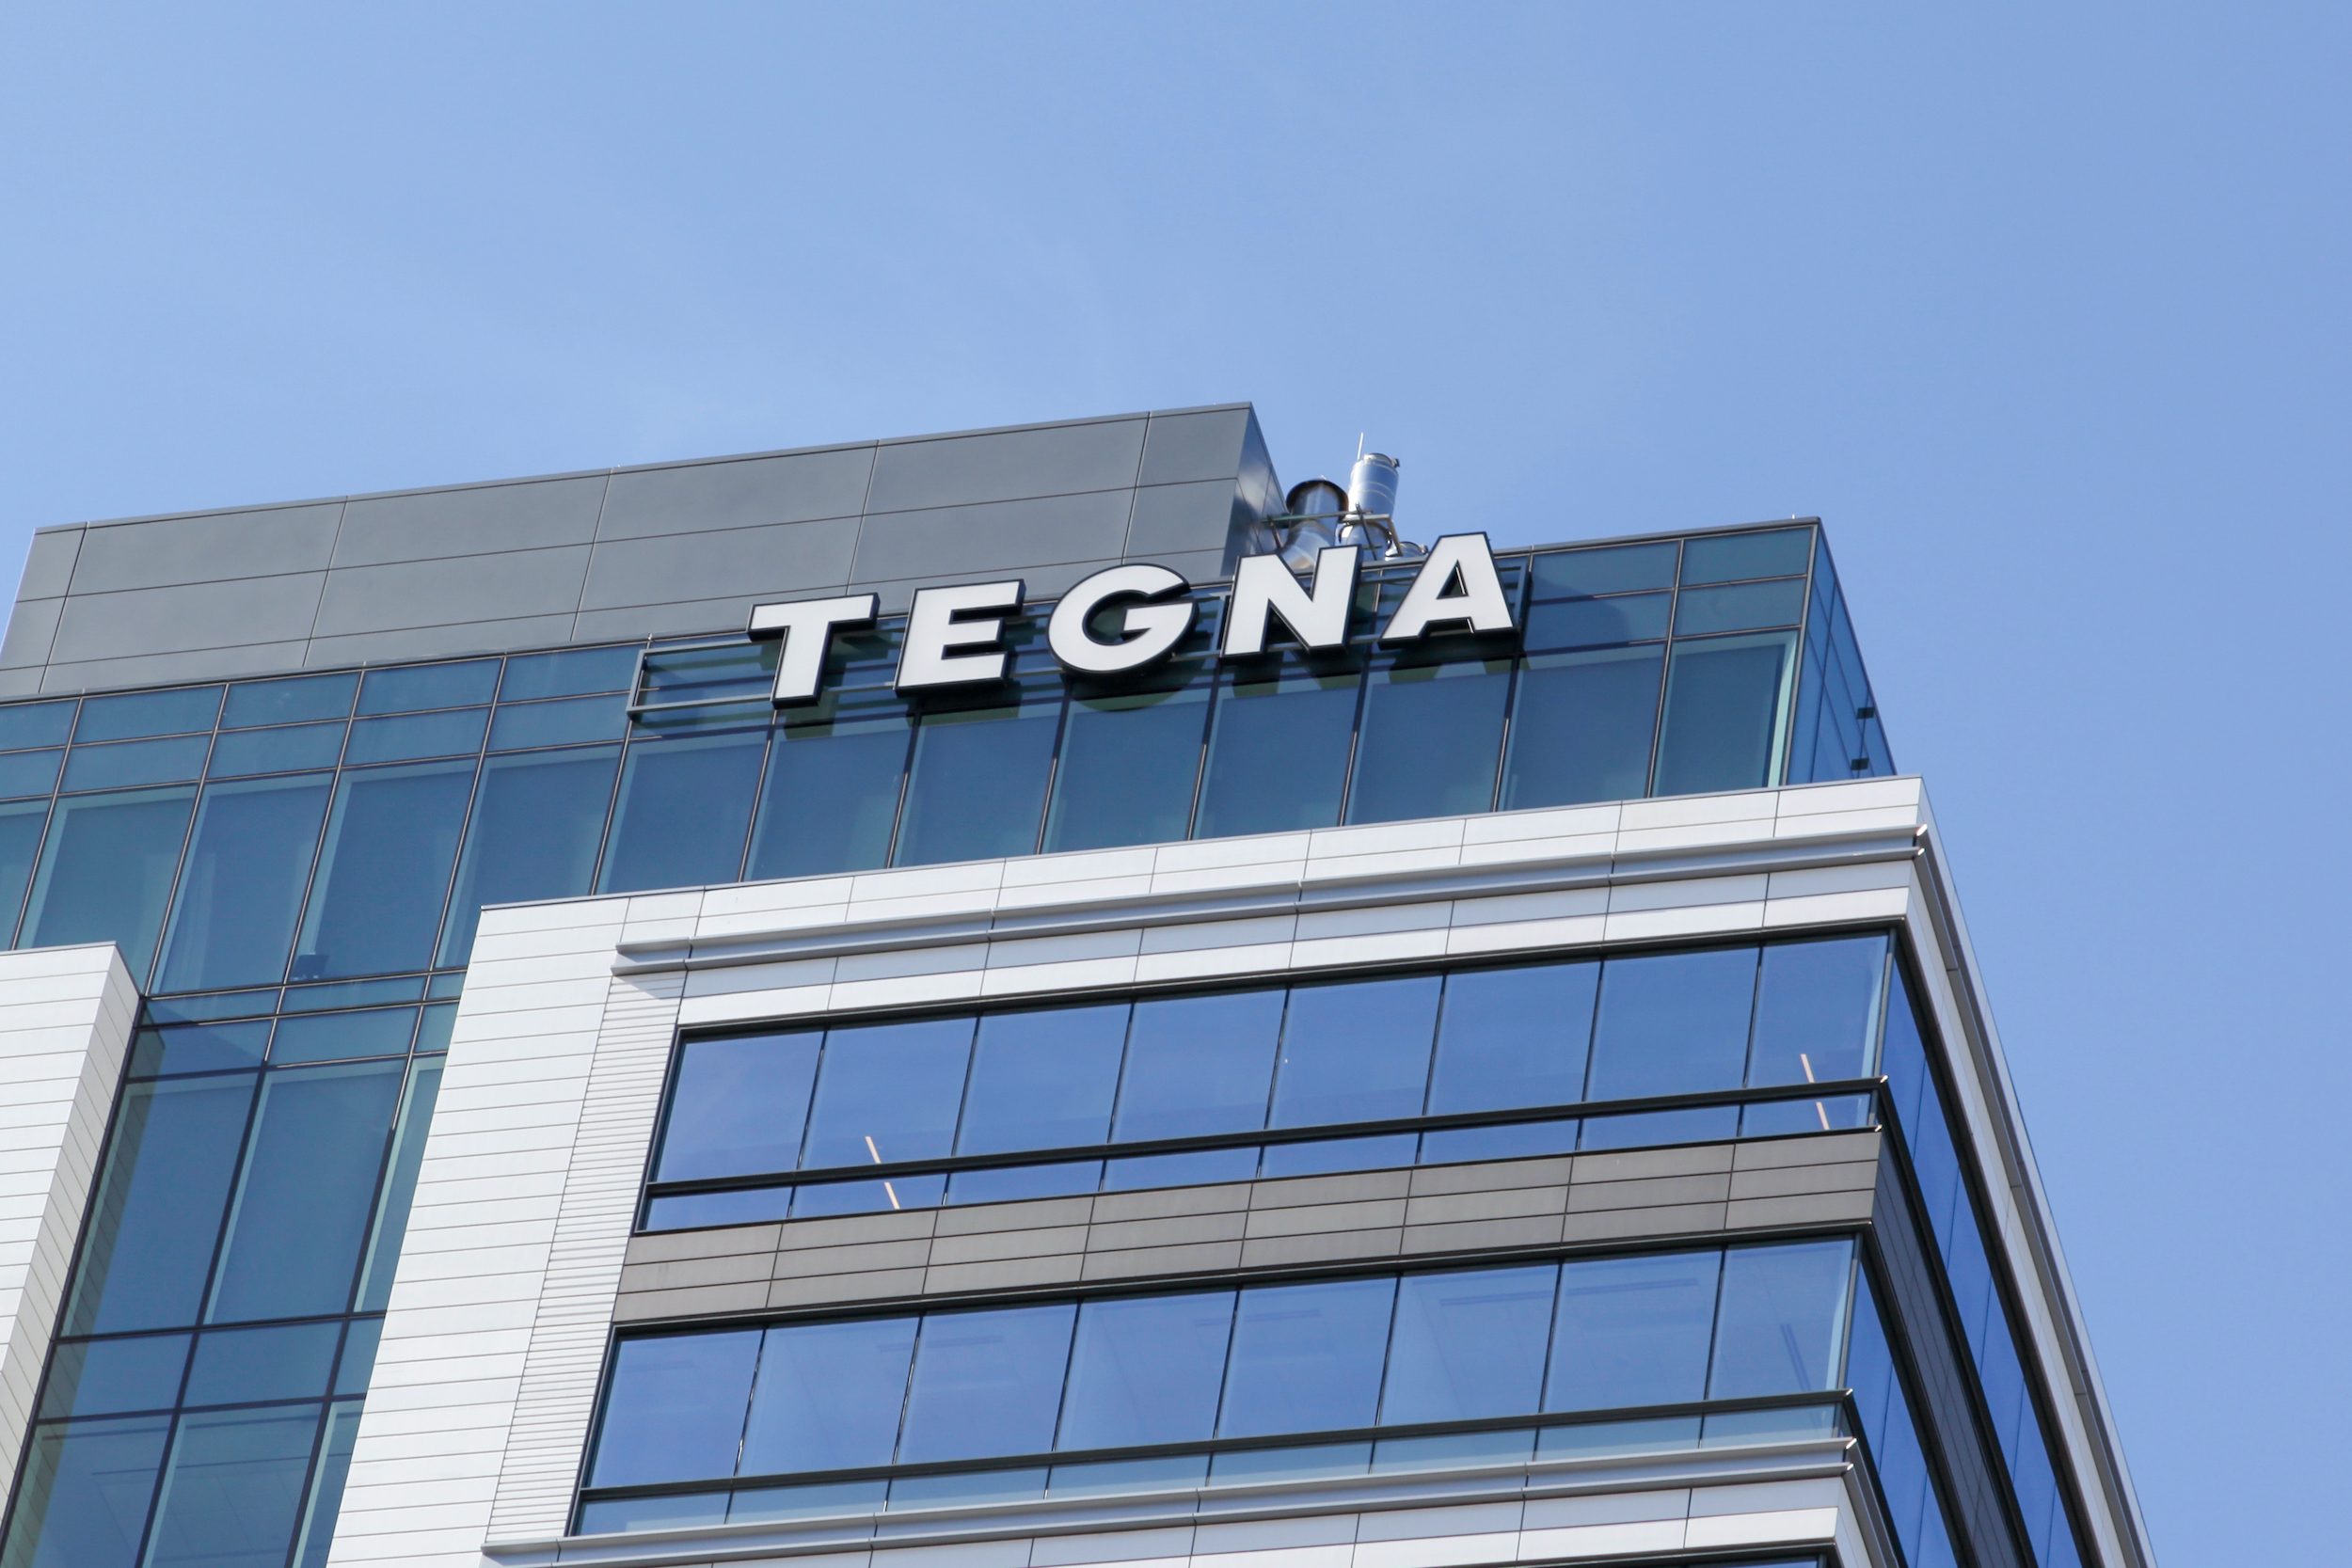 Local TV station owner Tegna will sell to Standard General in a $5.4B cash deal